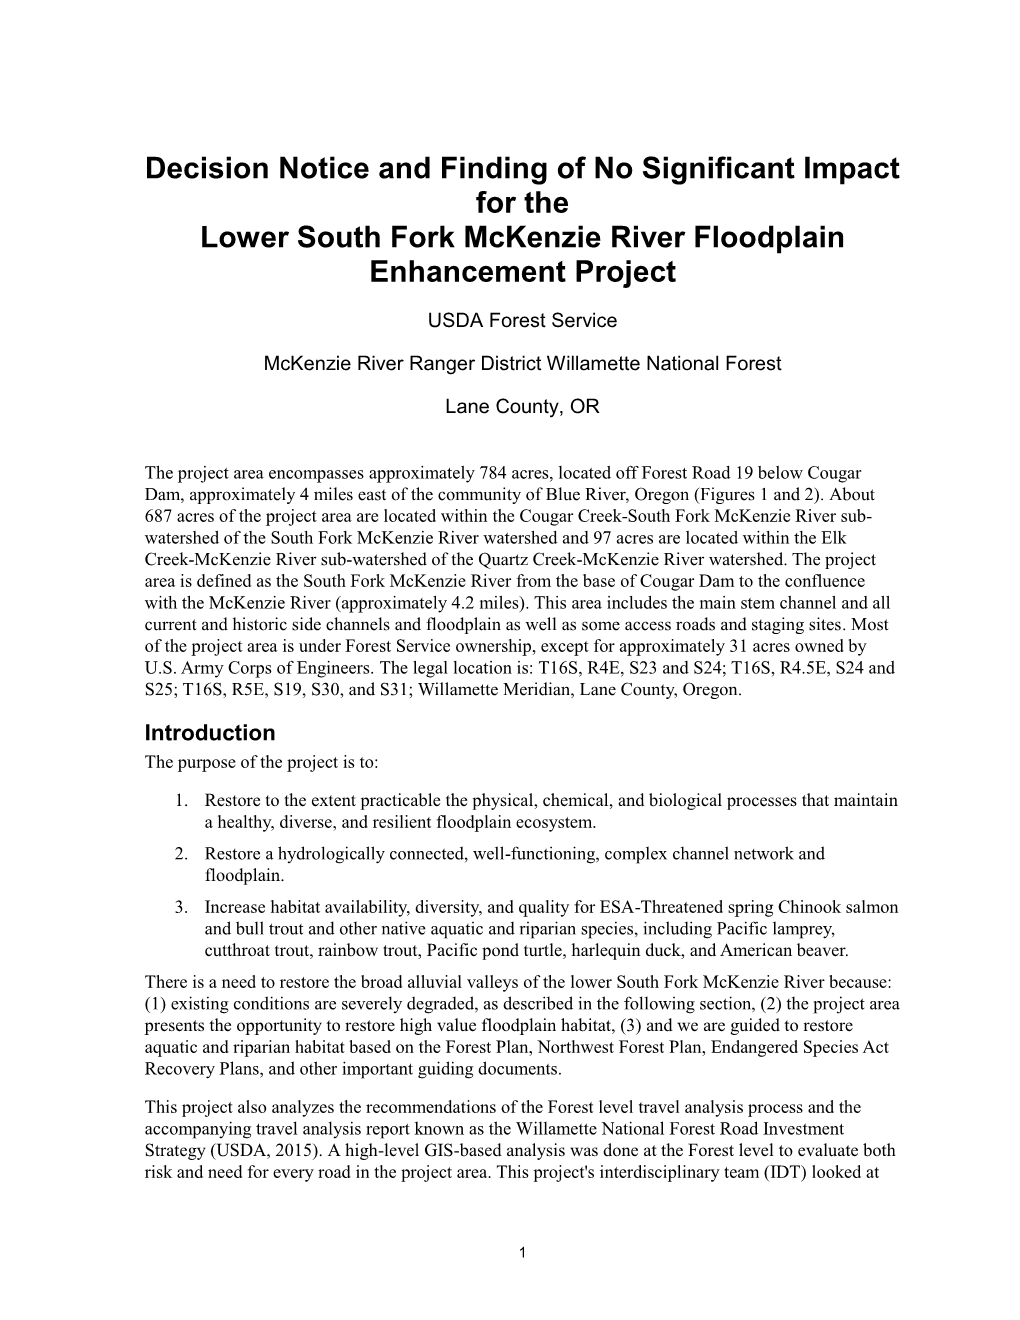 Decision Notice and Finding of No Significant Impact for the Lower South Fork Mckenzie River Floodplain Enhancement Project